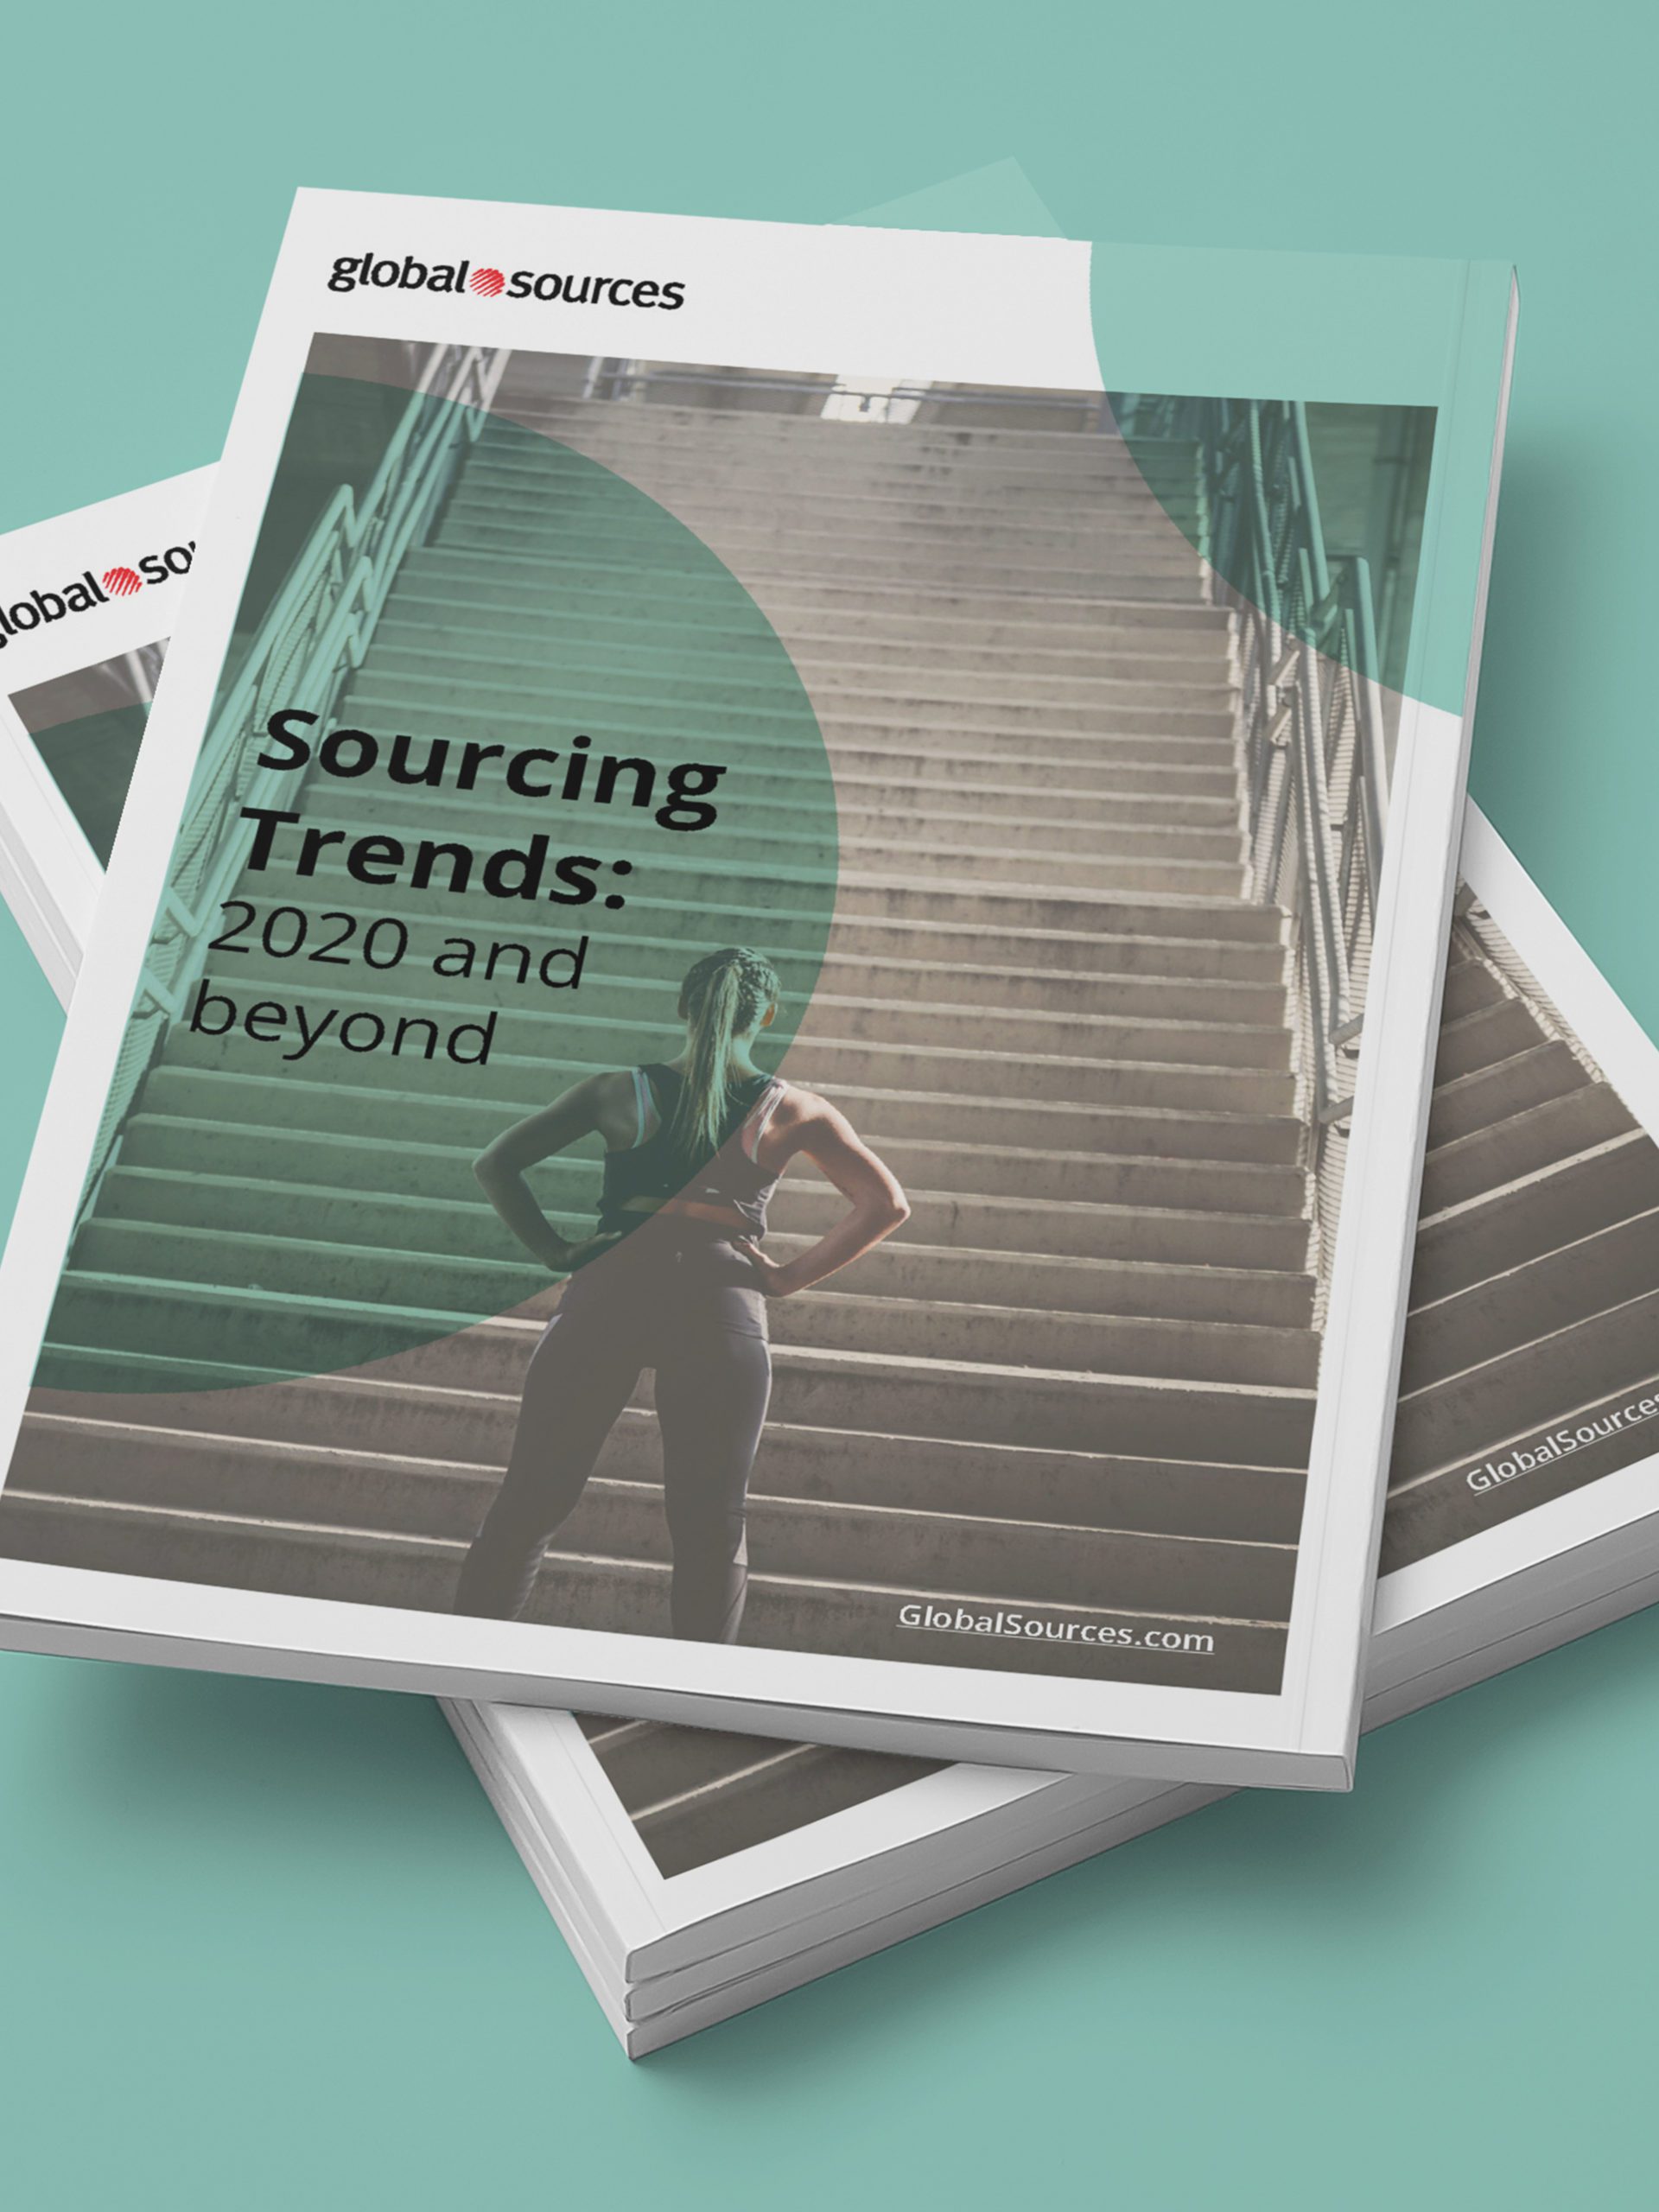 Global Sources Marketing E Book Design Sourcing Trends 2020 and Beyond